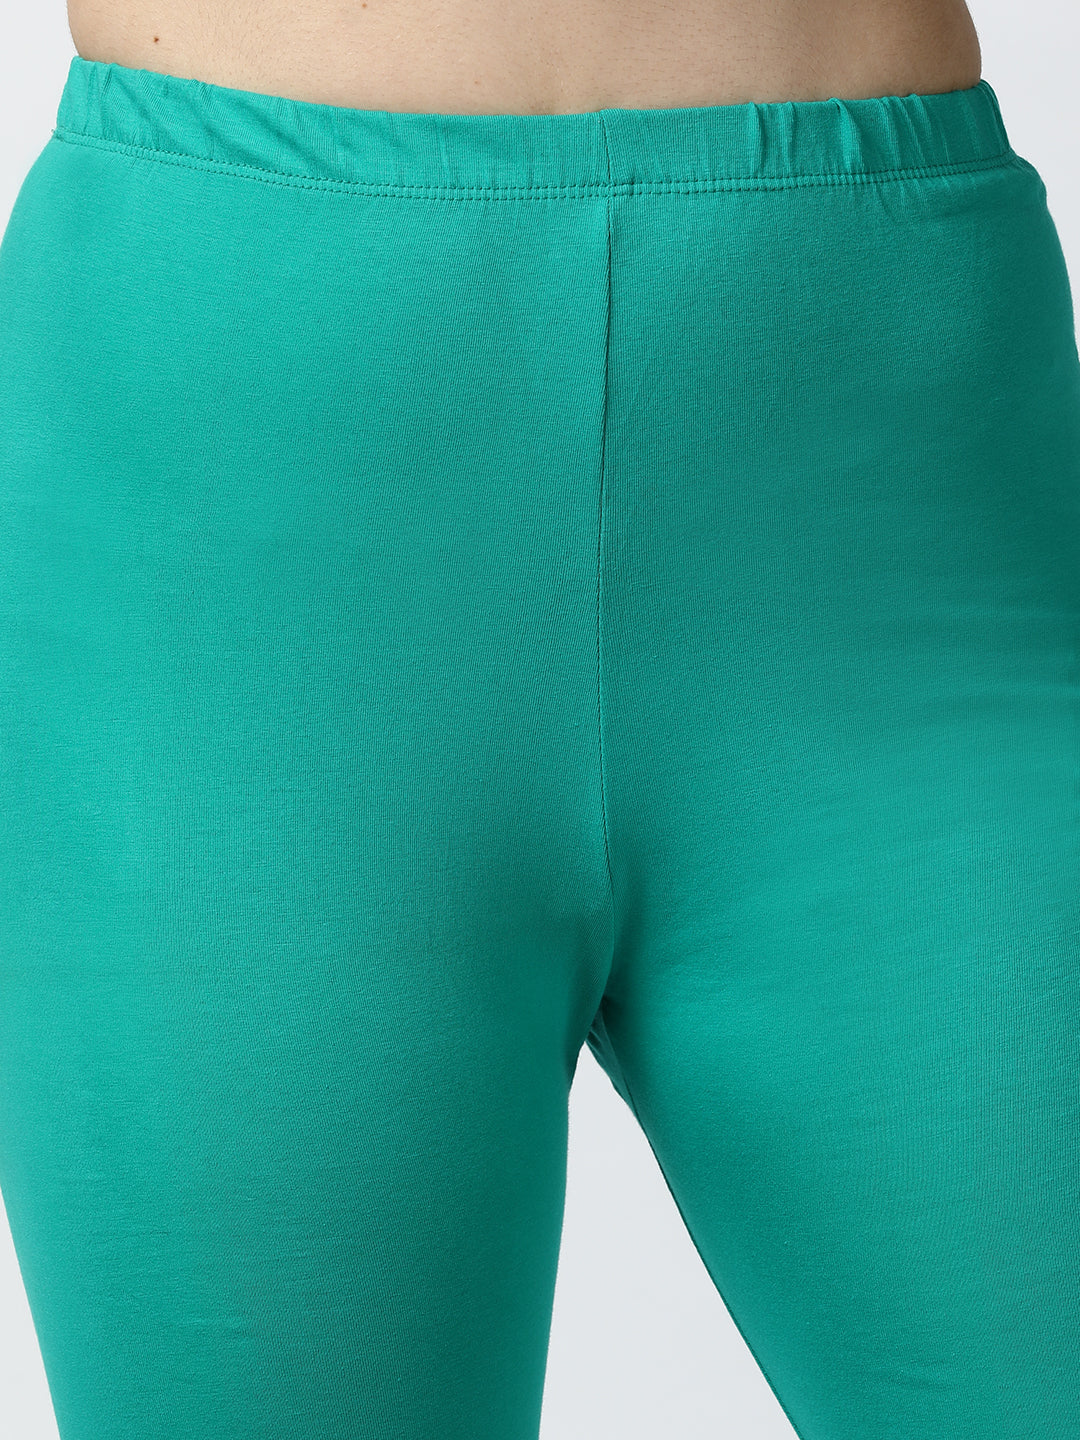 COTOPAXI Verso Hike Tight | Turquoise Women's Leggings | YOOX